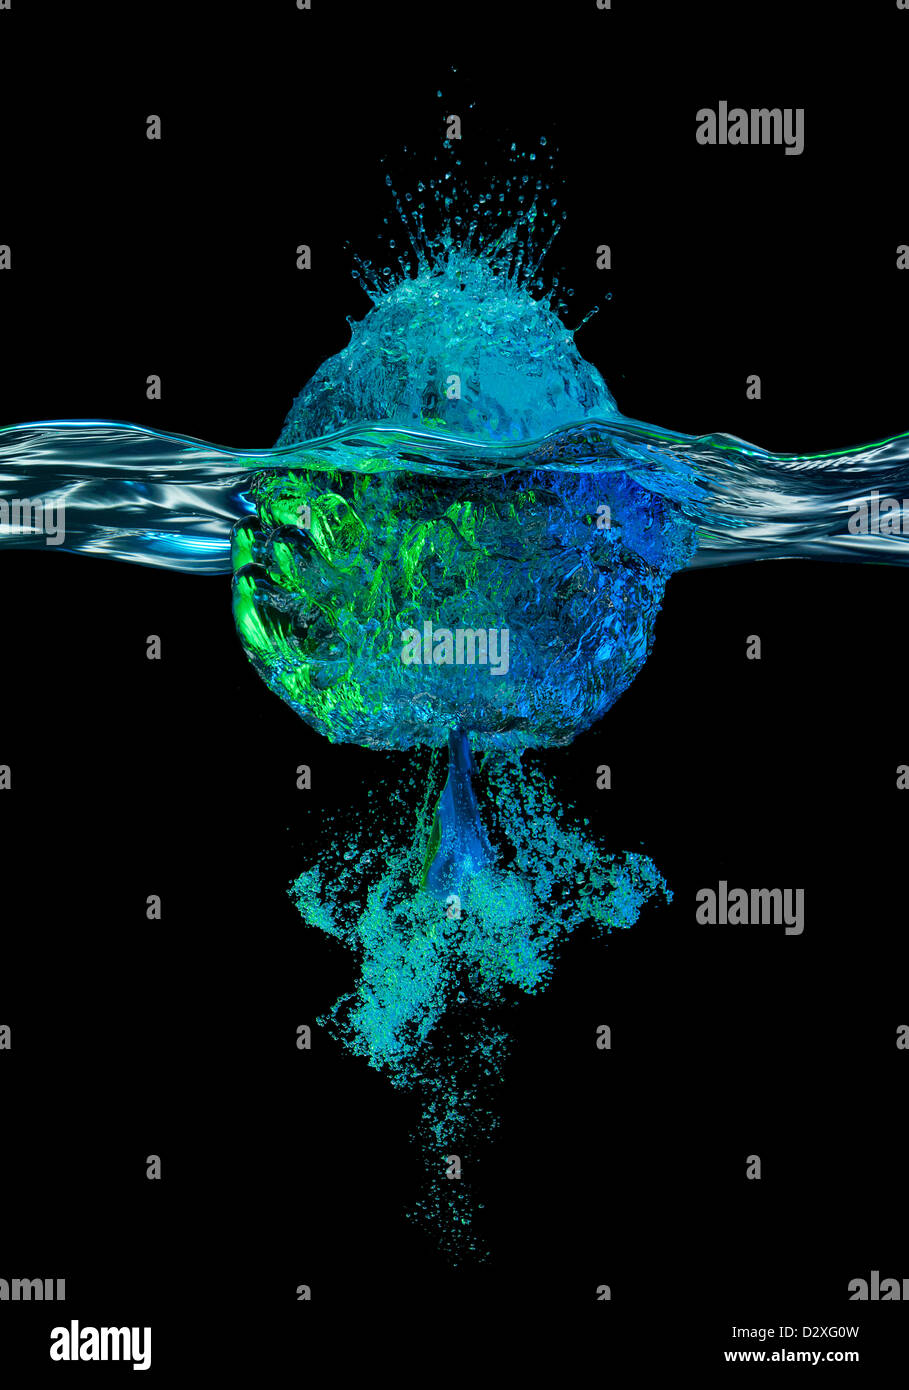 Blue and green balloon hitting water Stock Photo